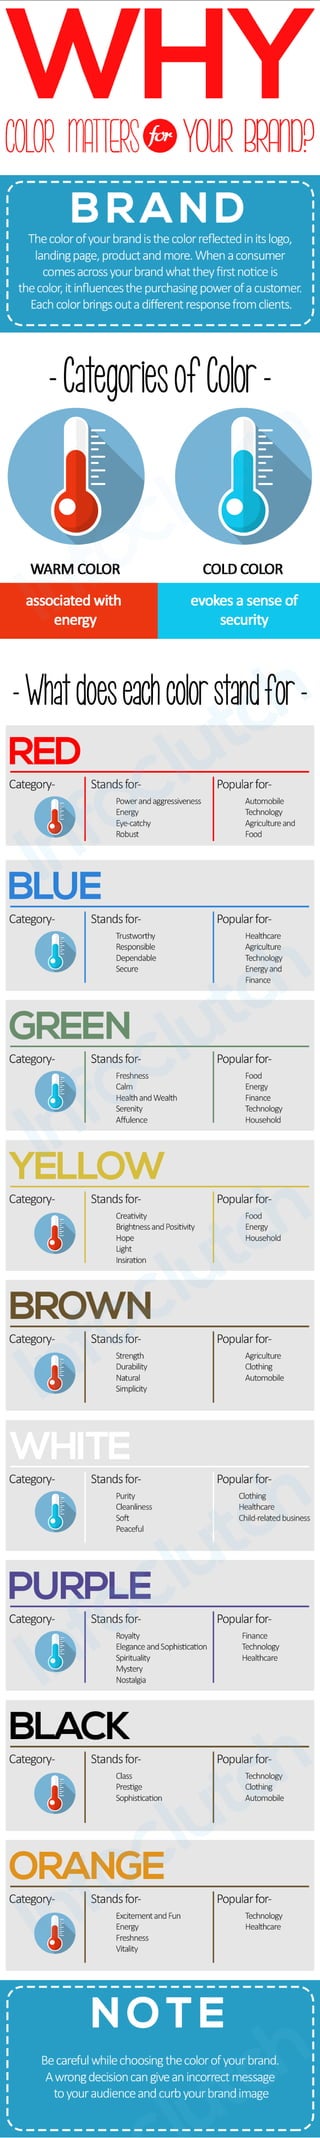 WHY COLOR MATTER FOR YOUR BRAND?